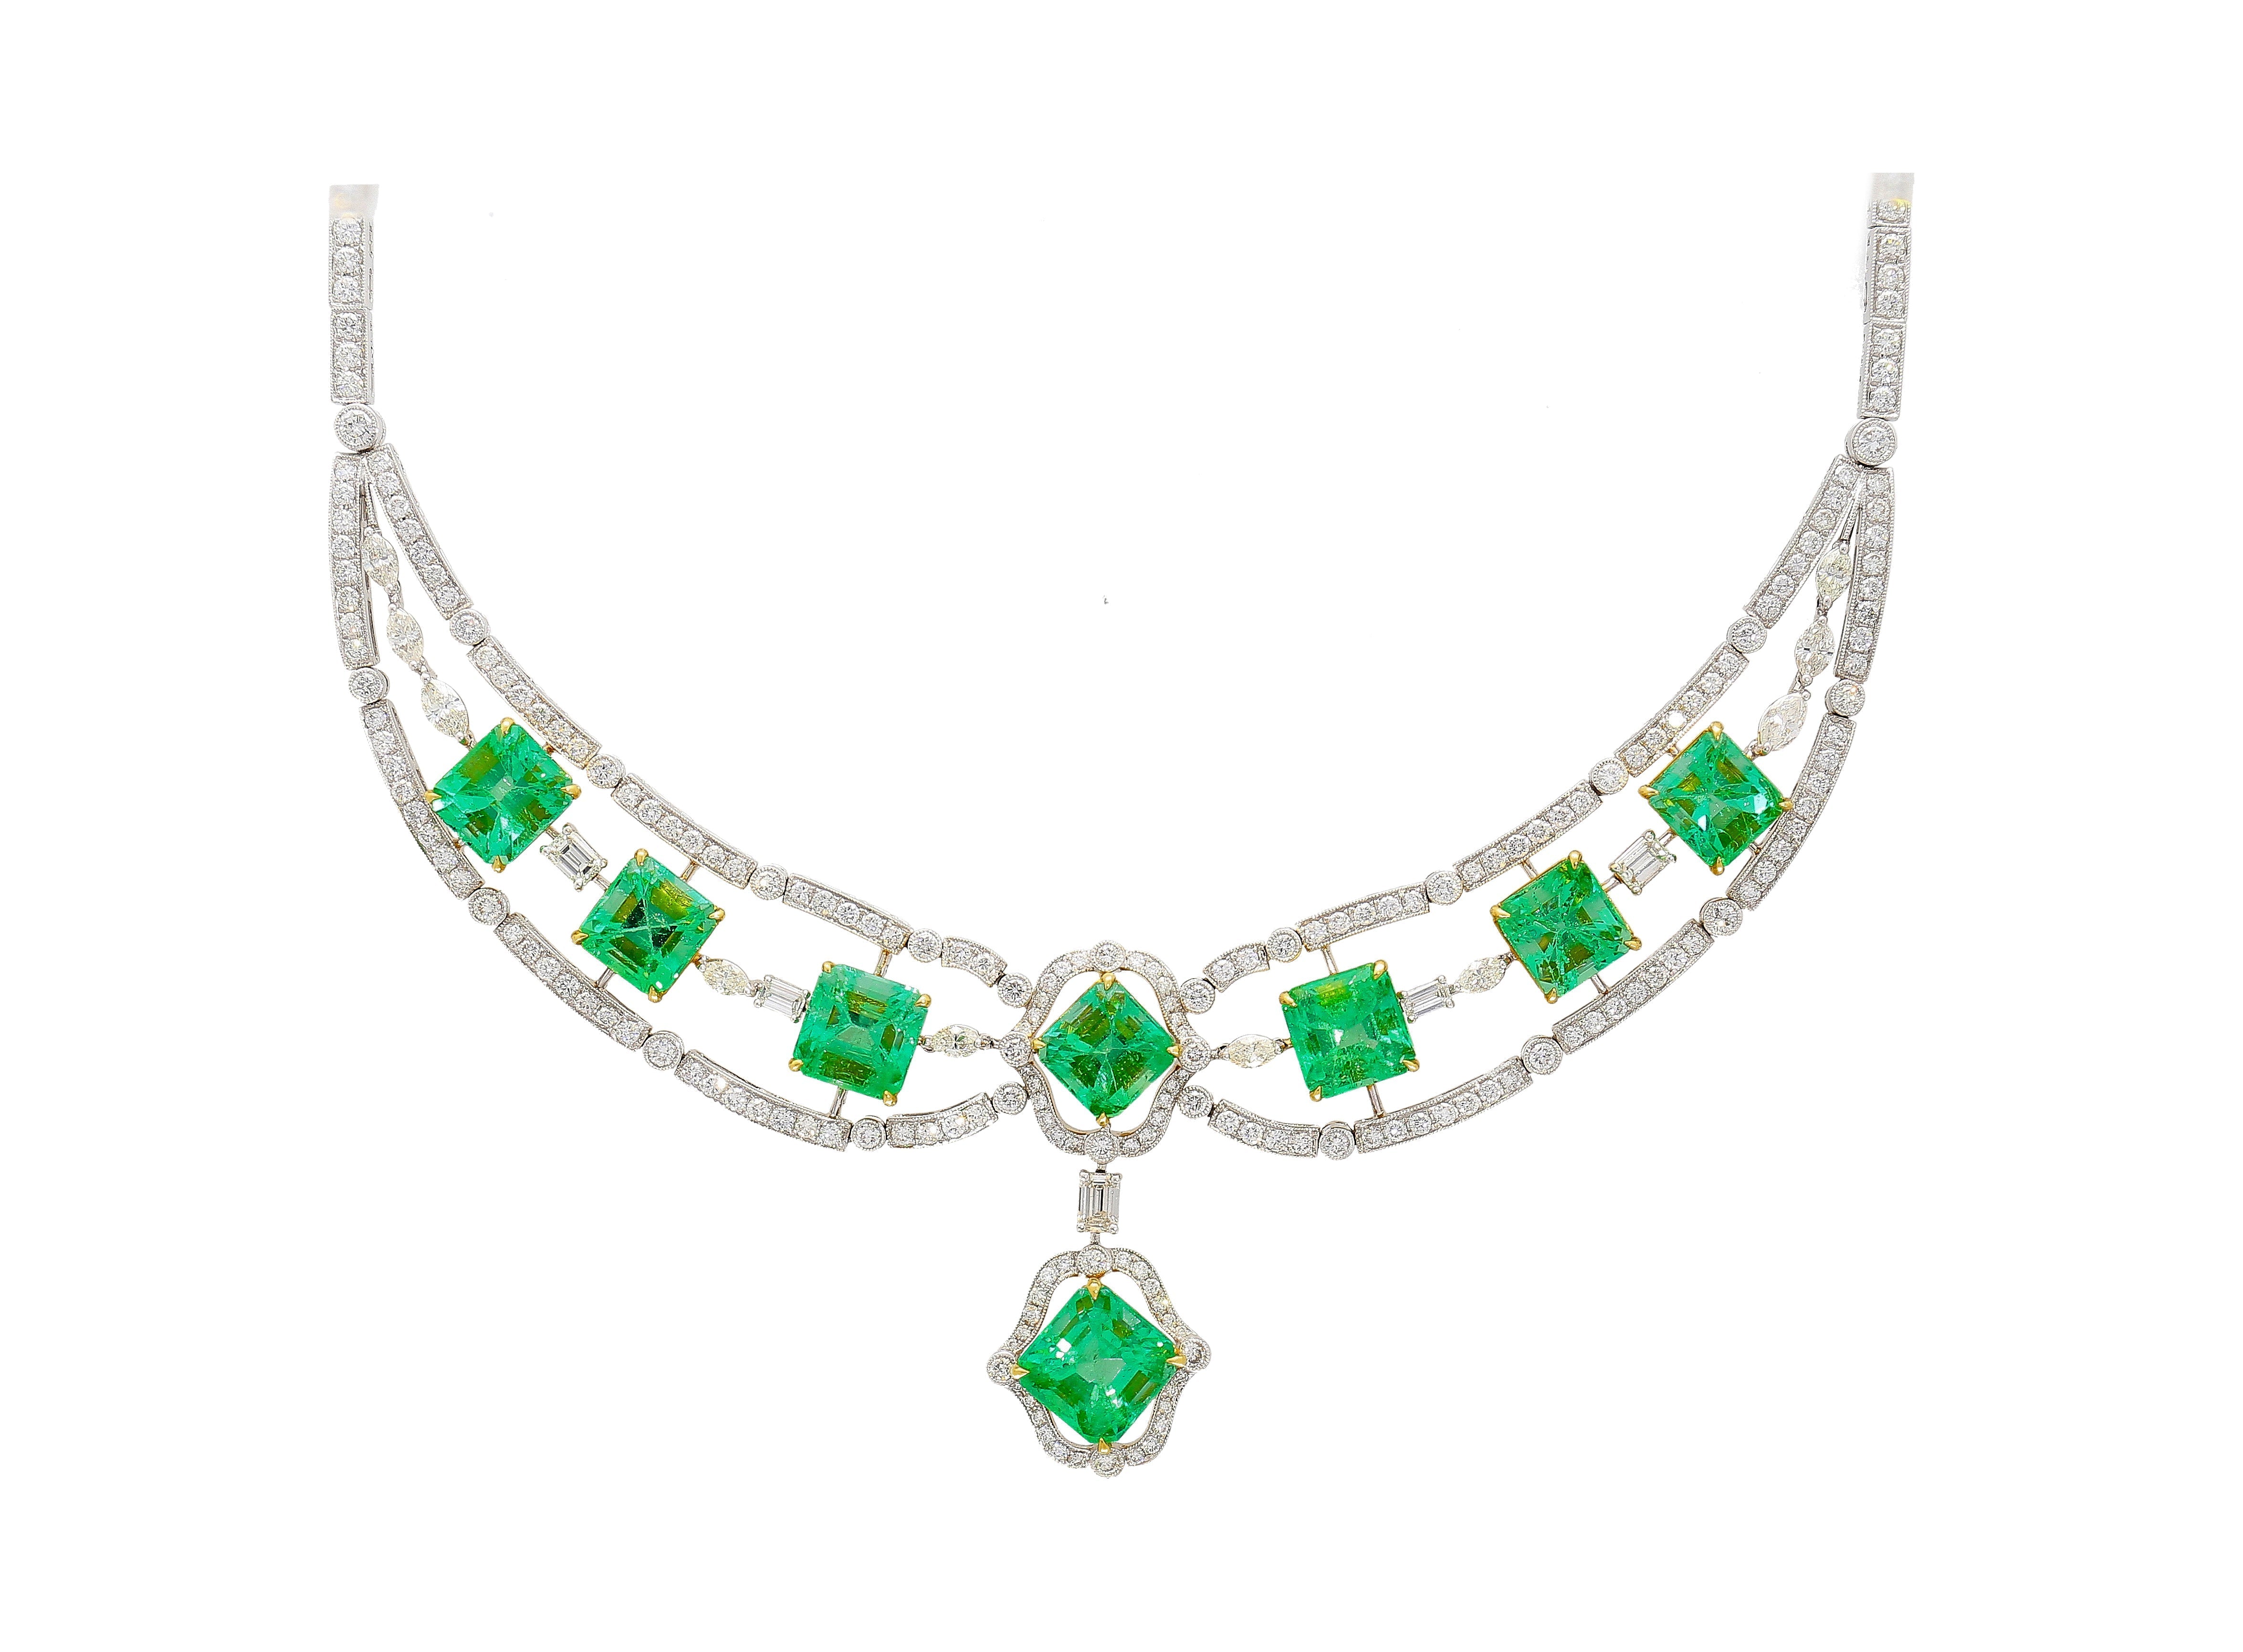 GIA-Certified-6_21-Carat-Emerald-and-30_38-Carat-Emerald-With-9_86-Carat-Diamonds-Chandelier-Necklace-Necklace.jpg